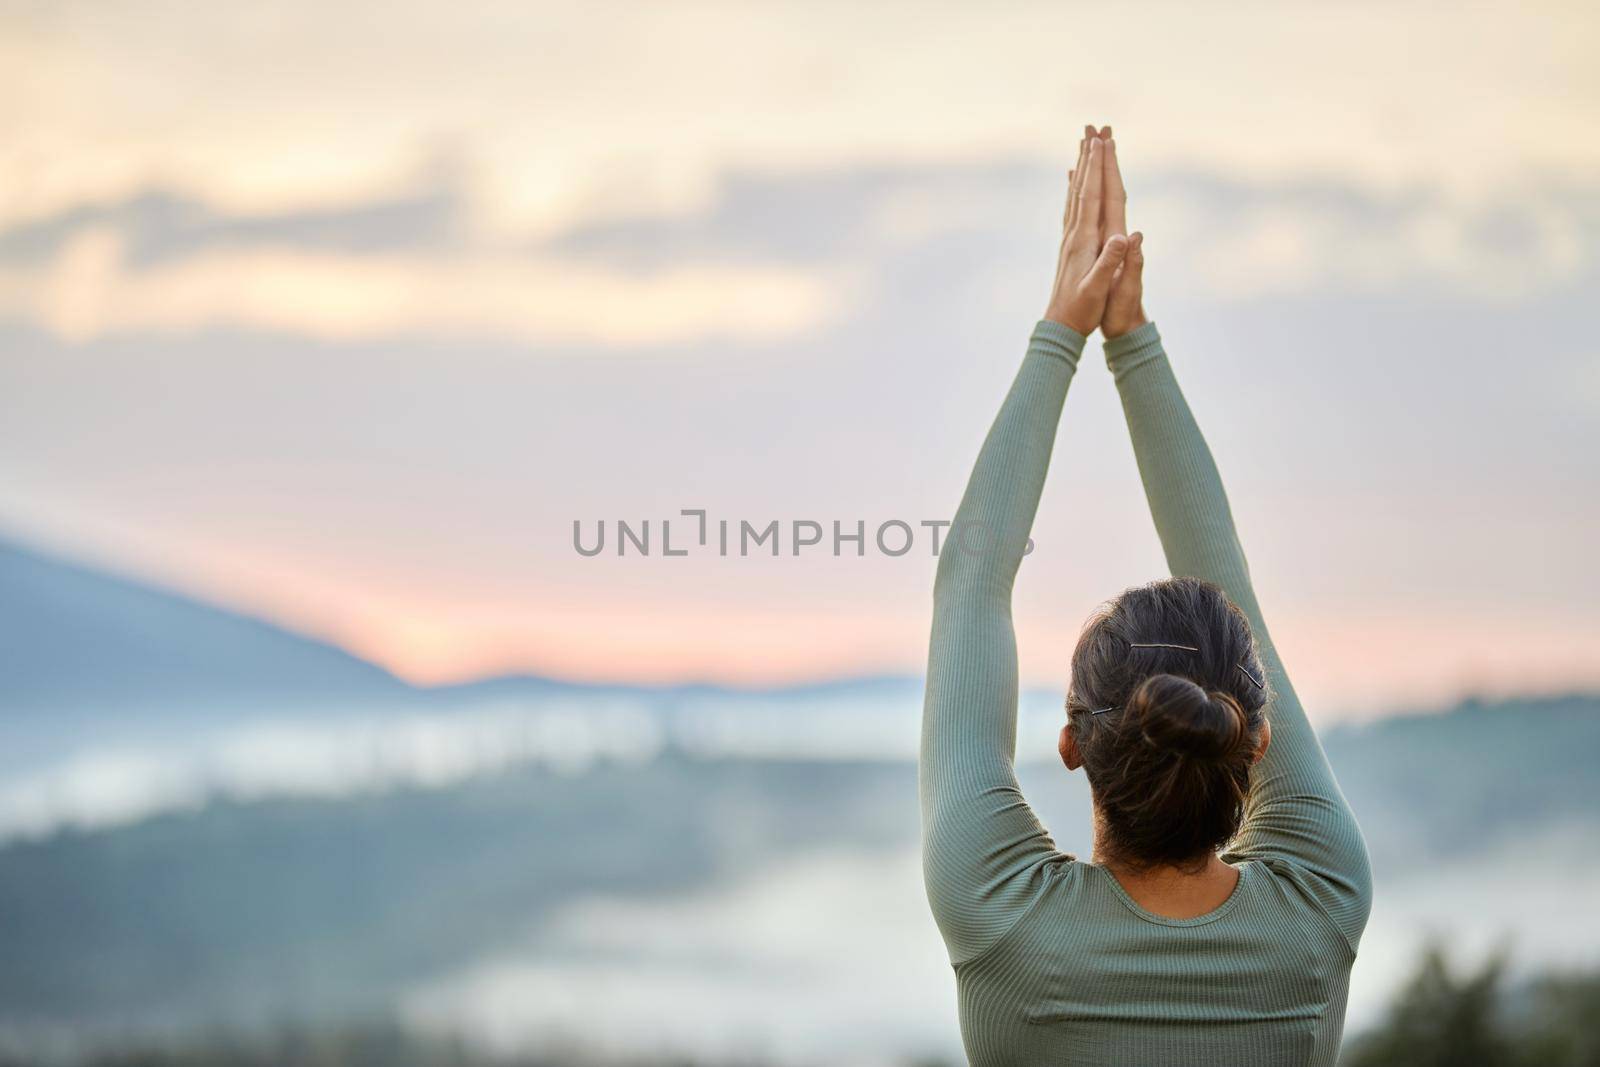 Back view of young girl in blue wear doing virabhadrasana on blur nature background. Crop of woman standing in warrior pose raising hands up folding together in cloudy mountains. Concept of balance.